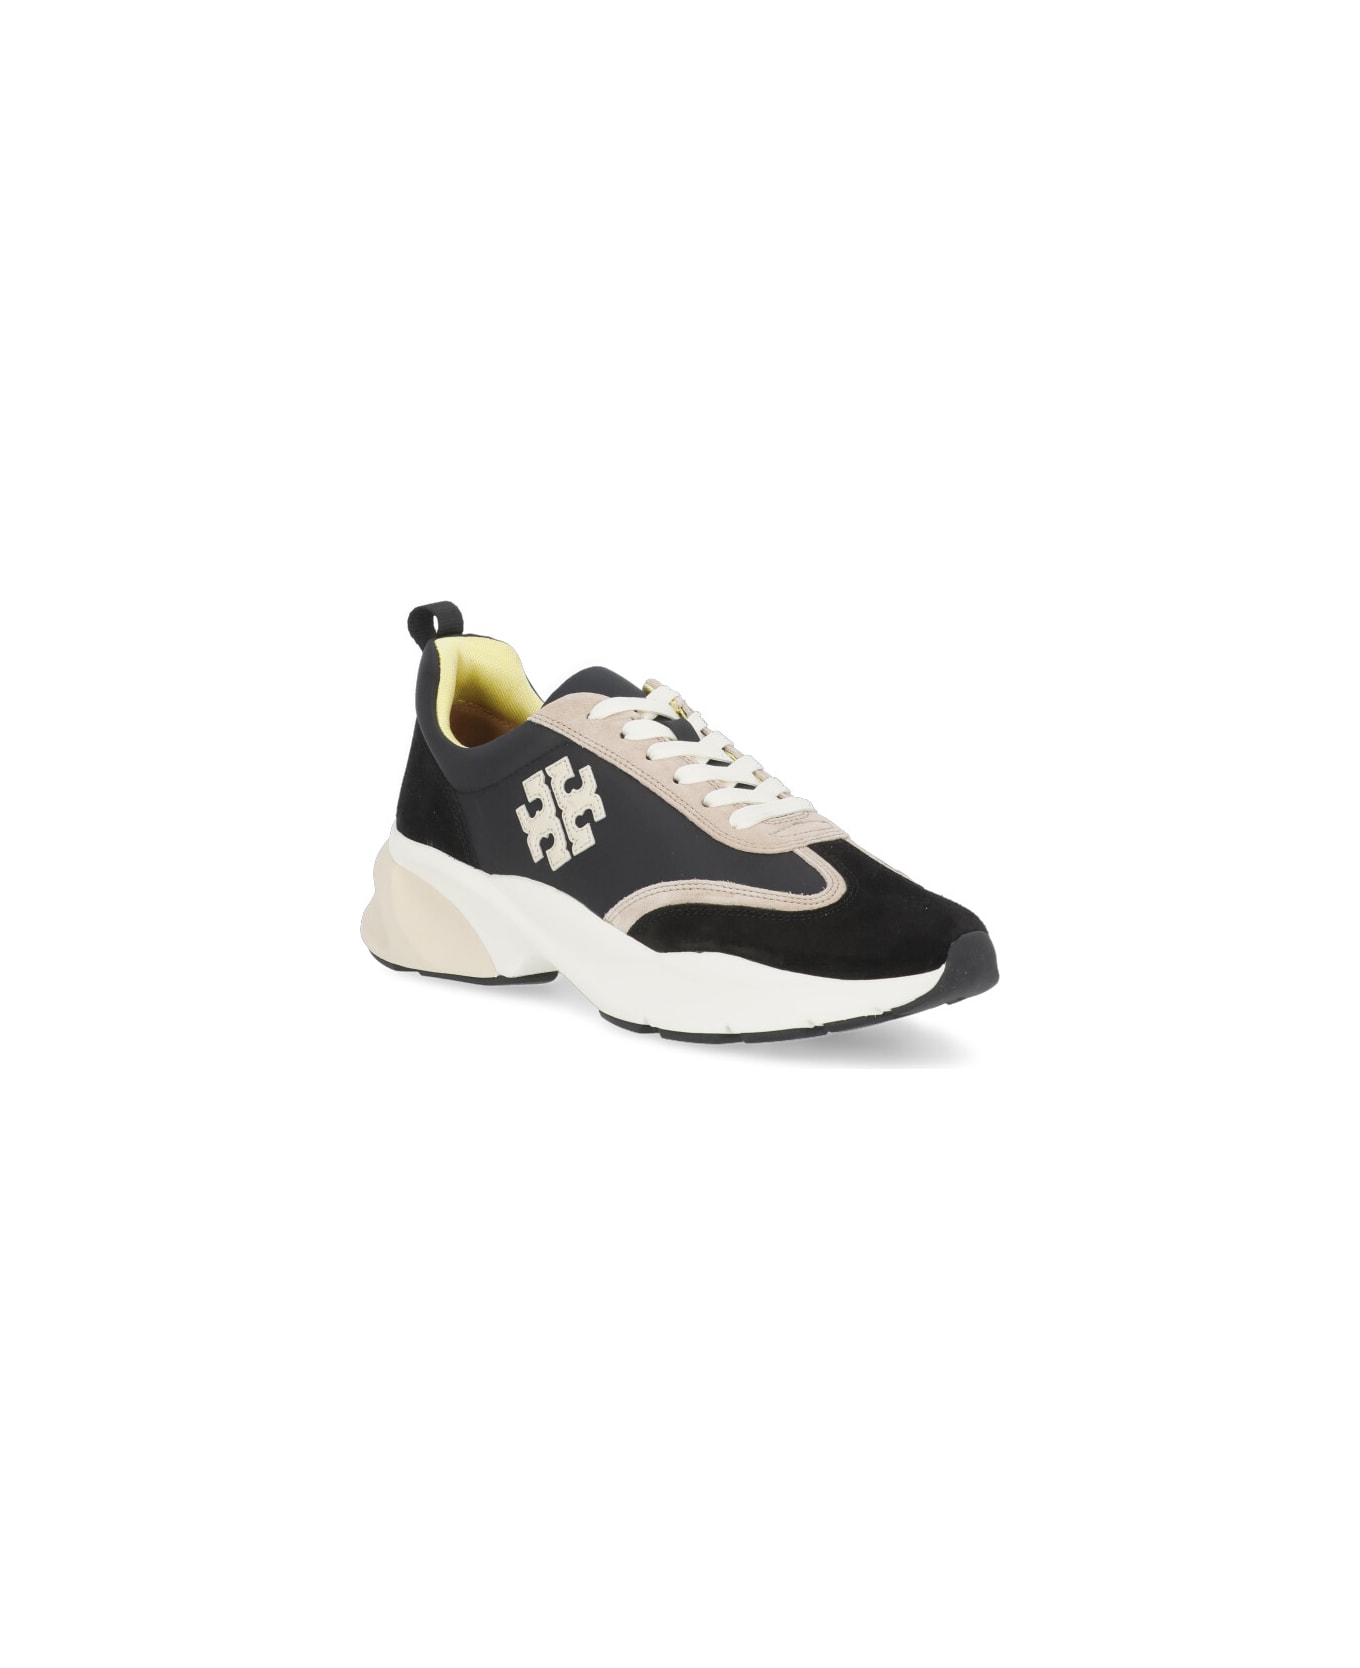 Tory Burch Good Luck Leather Sneakers - Black / Cream / Black